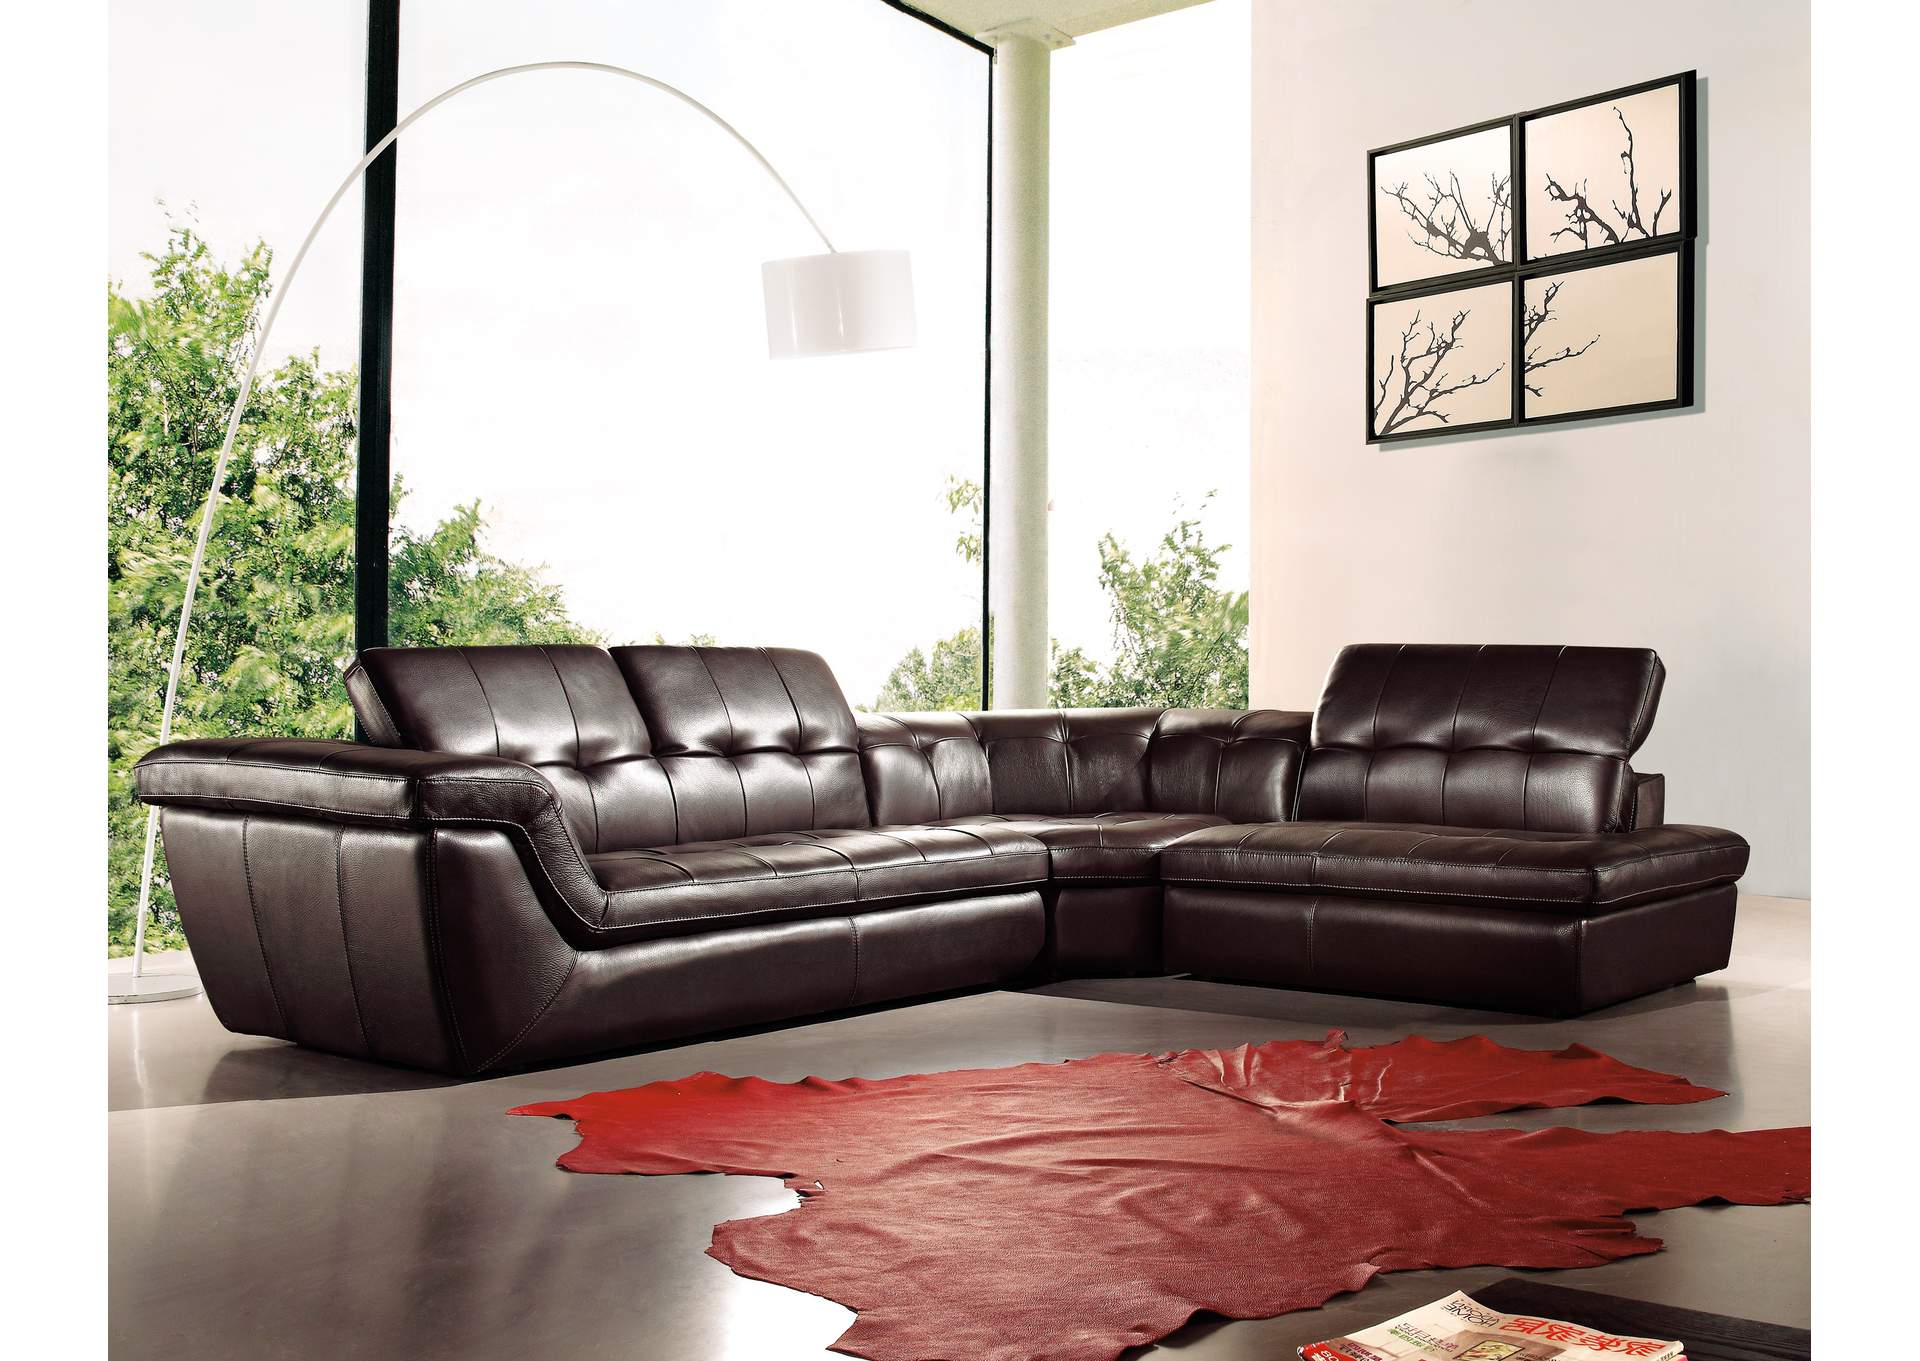 397 Italian Leather Sectional Chocolate Color in Right Hand Facing,J&M Furniture